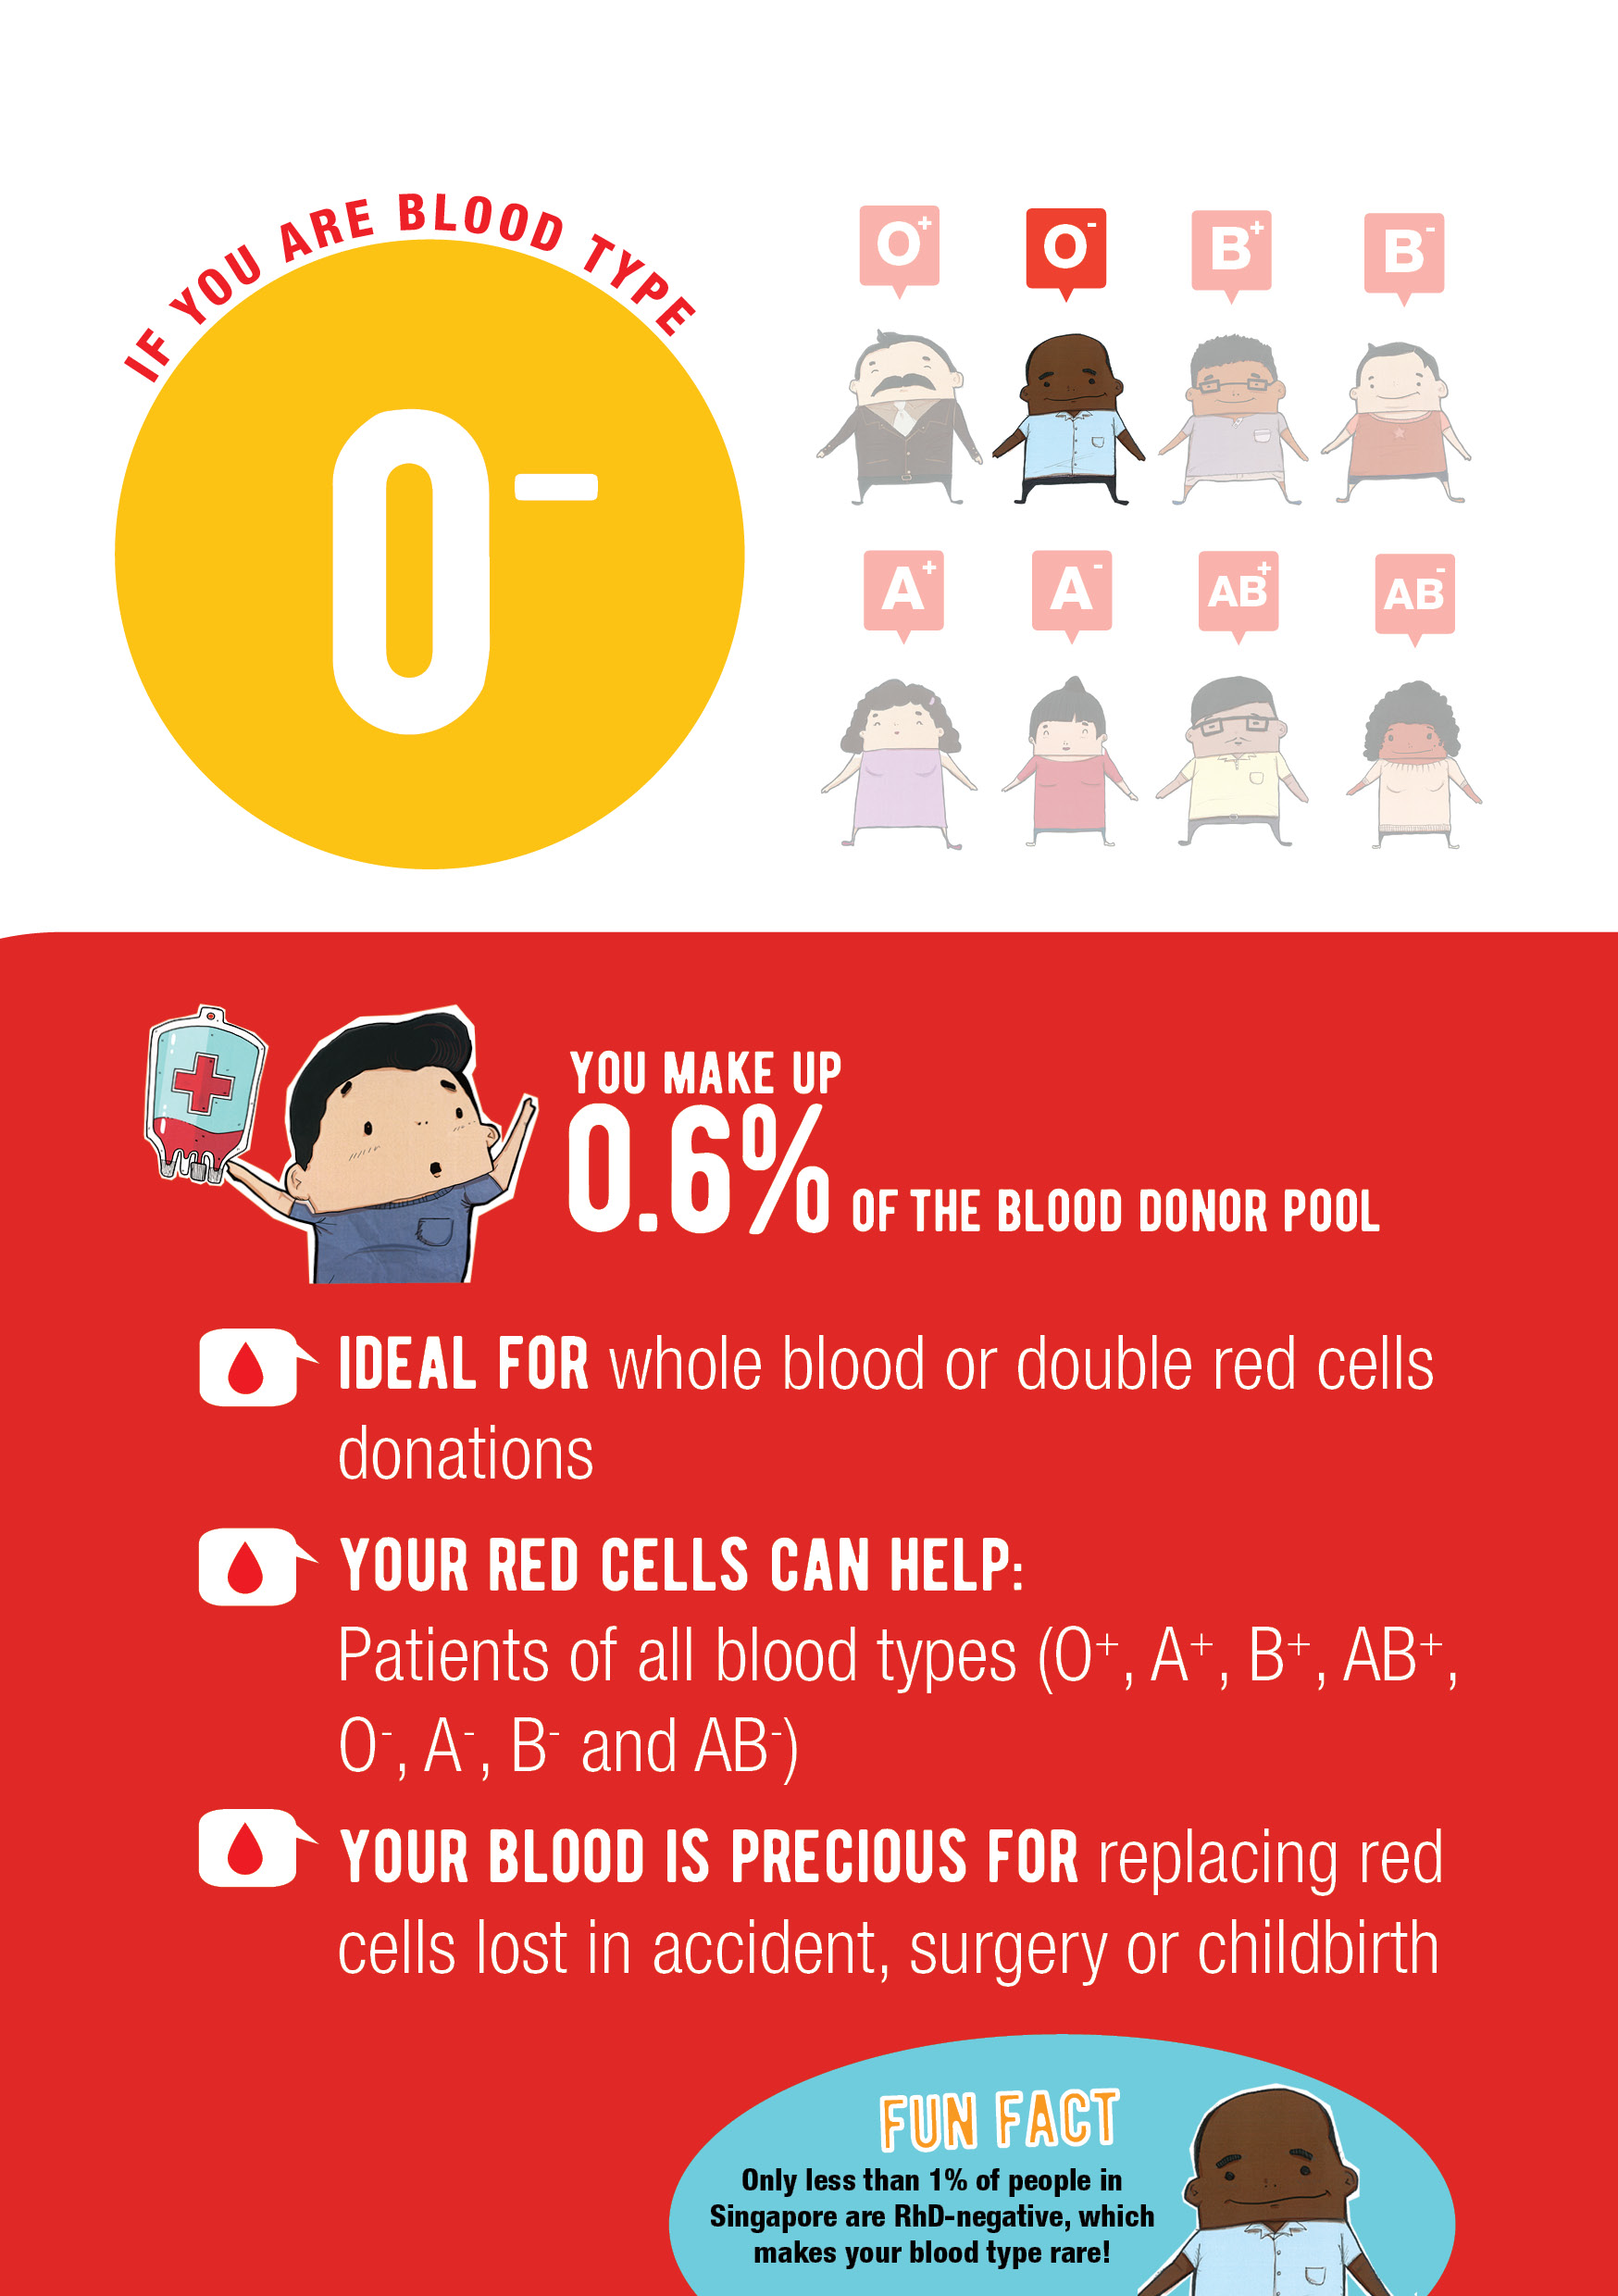 how does a person get a negative blood type